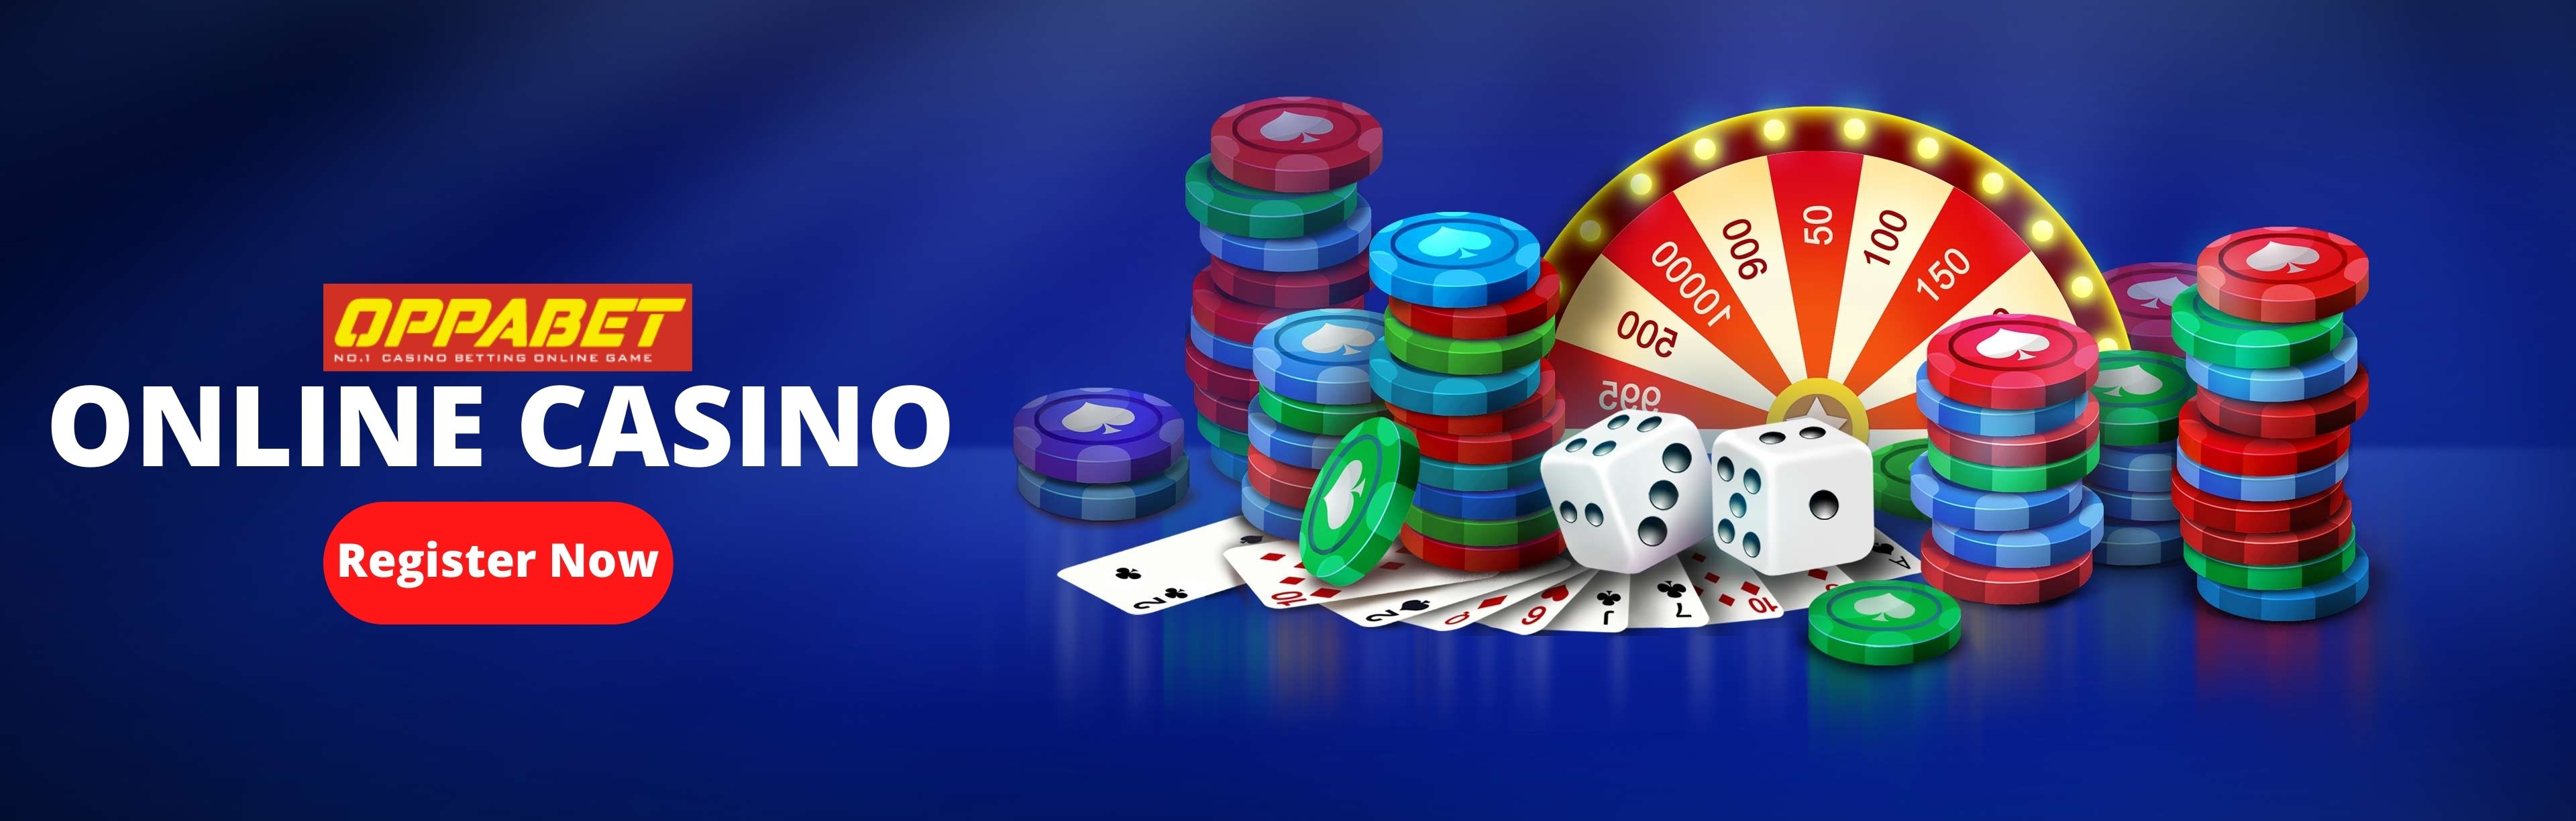 Real Money Online Casino: Amazing Games On Your Smartphone